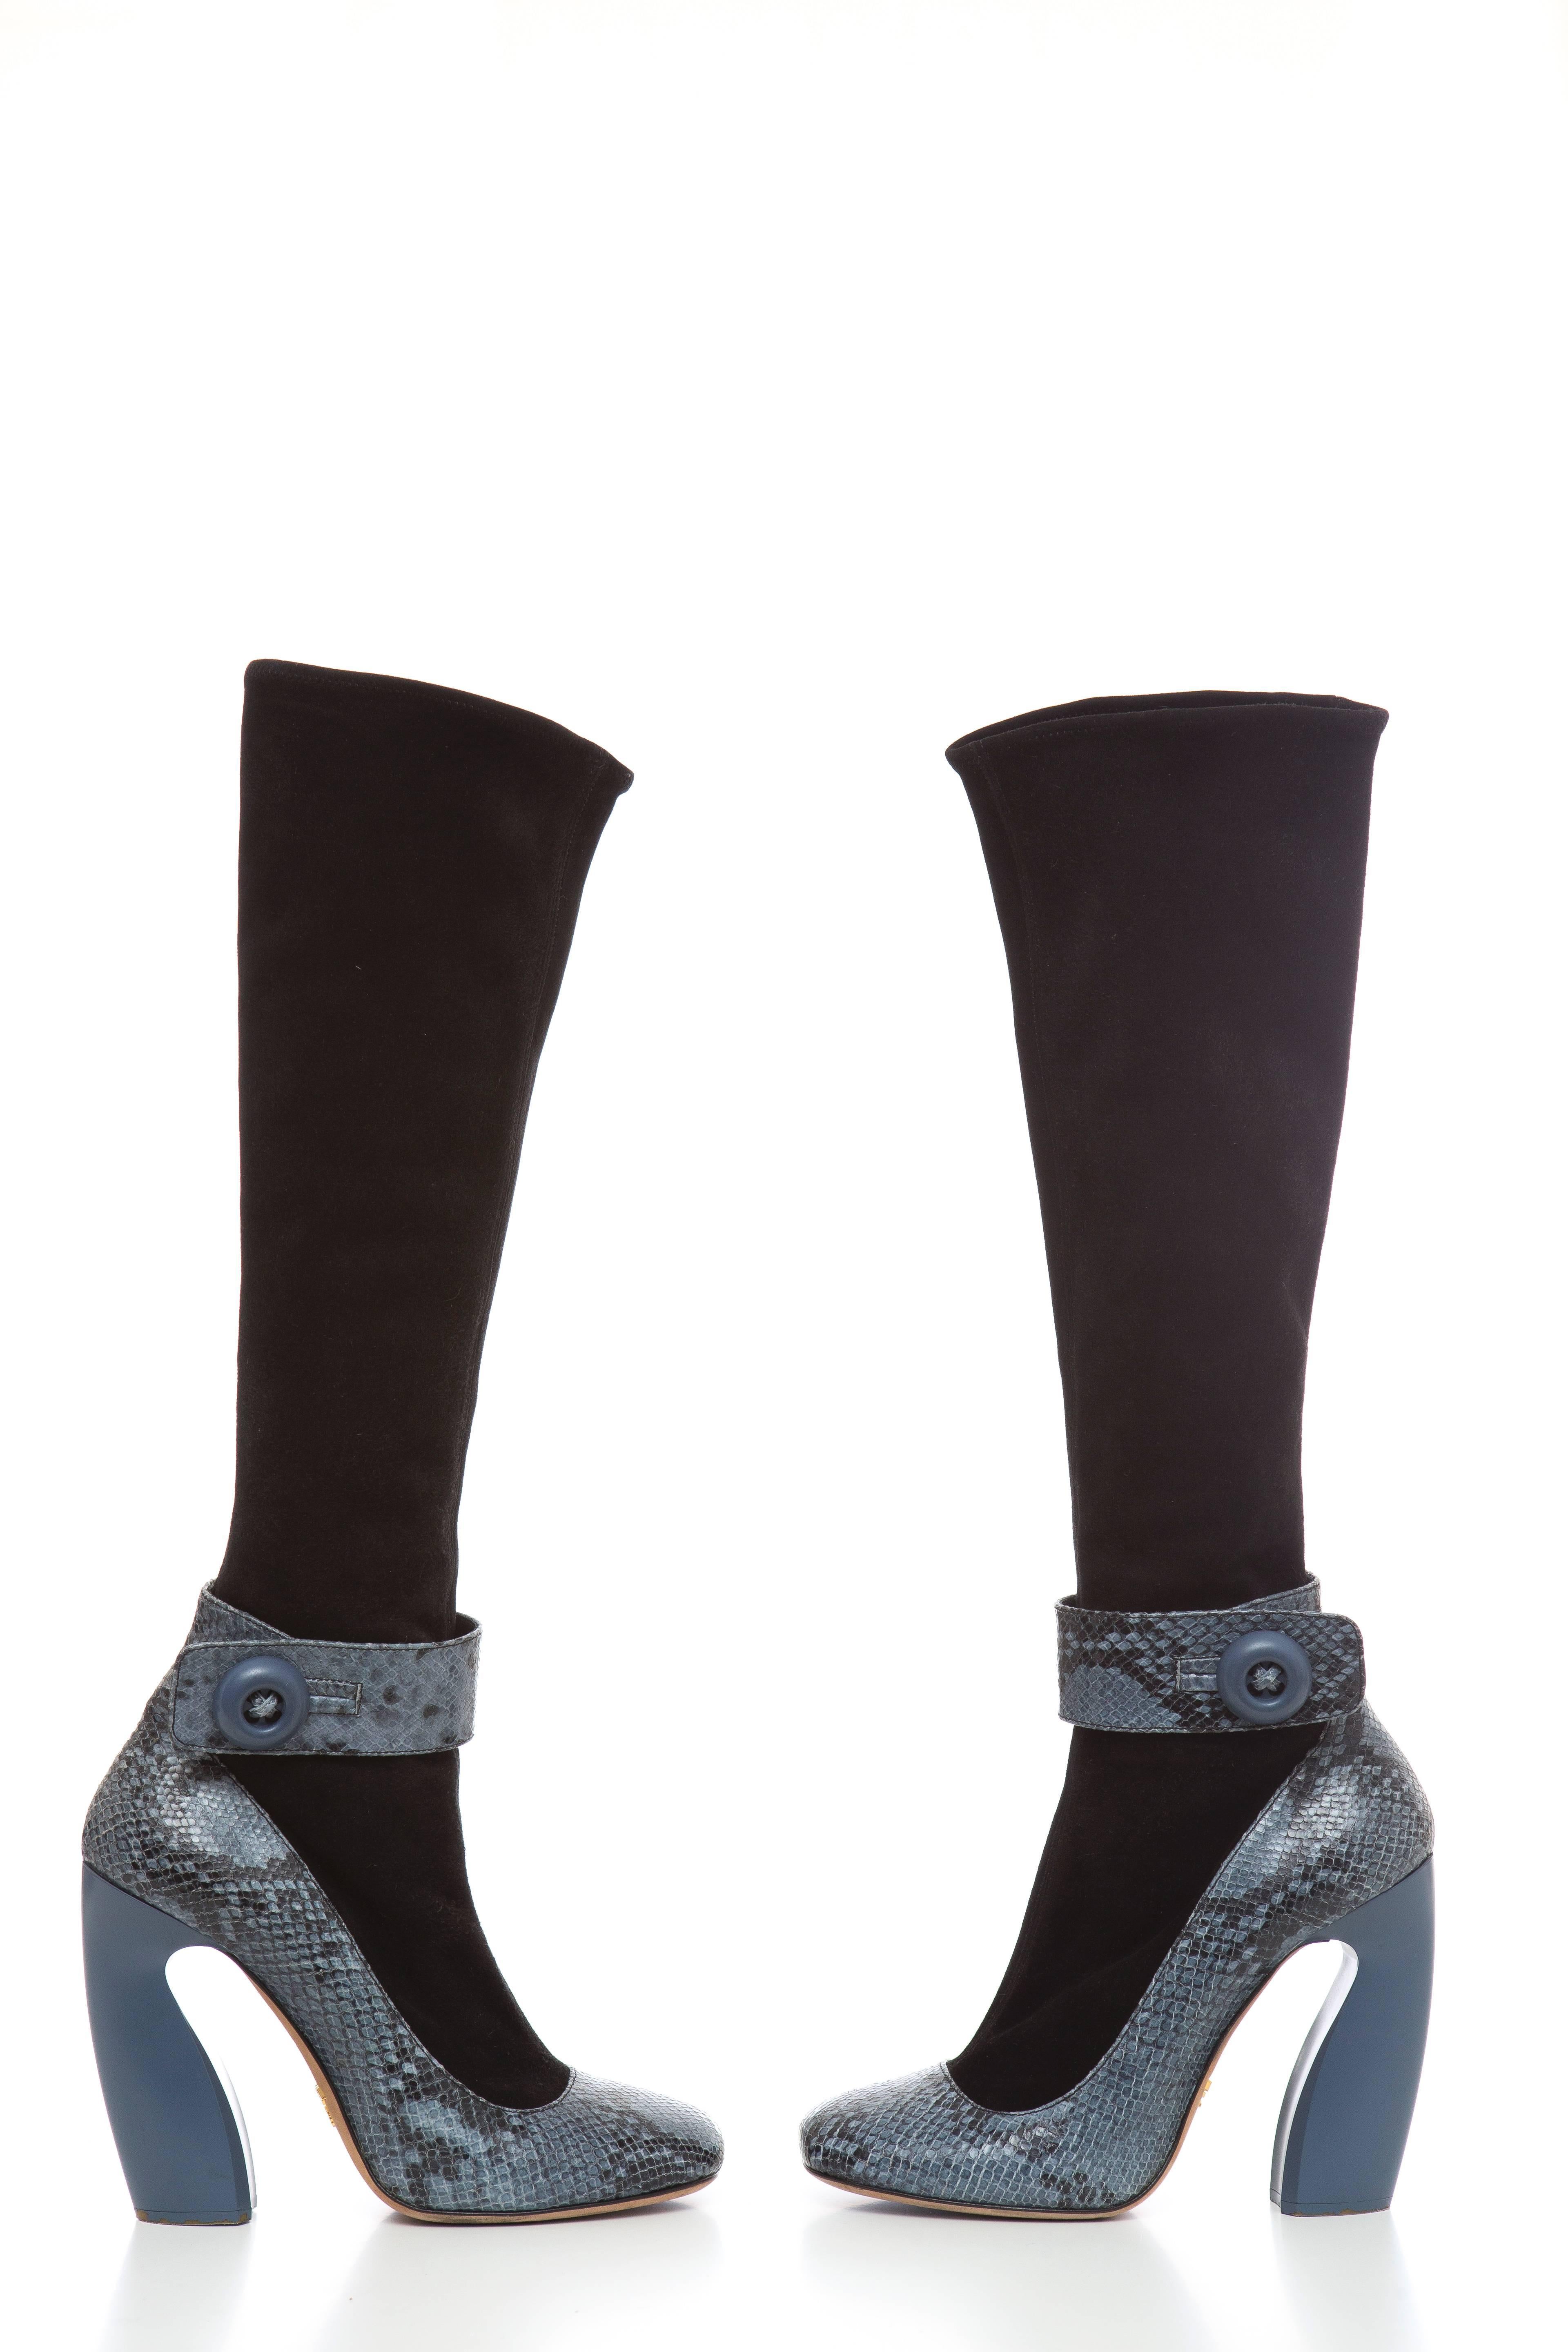 Prada, Autumn-Winter 2011, round-toe knee-high boots with python trim, sculpted heels, button closures at ankles and zip closures at sides.

IT. 9
US. 9

Calf Circumference: 12"
Shaft: 16"
Heels: 4.75"